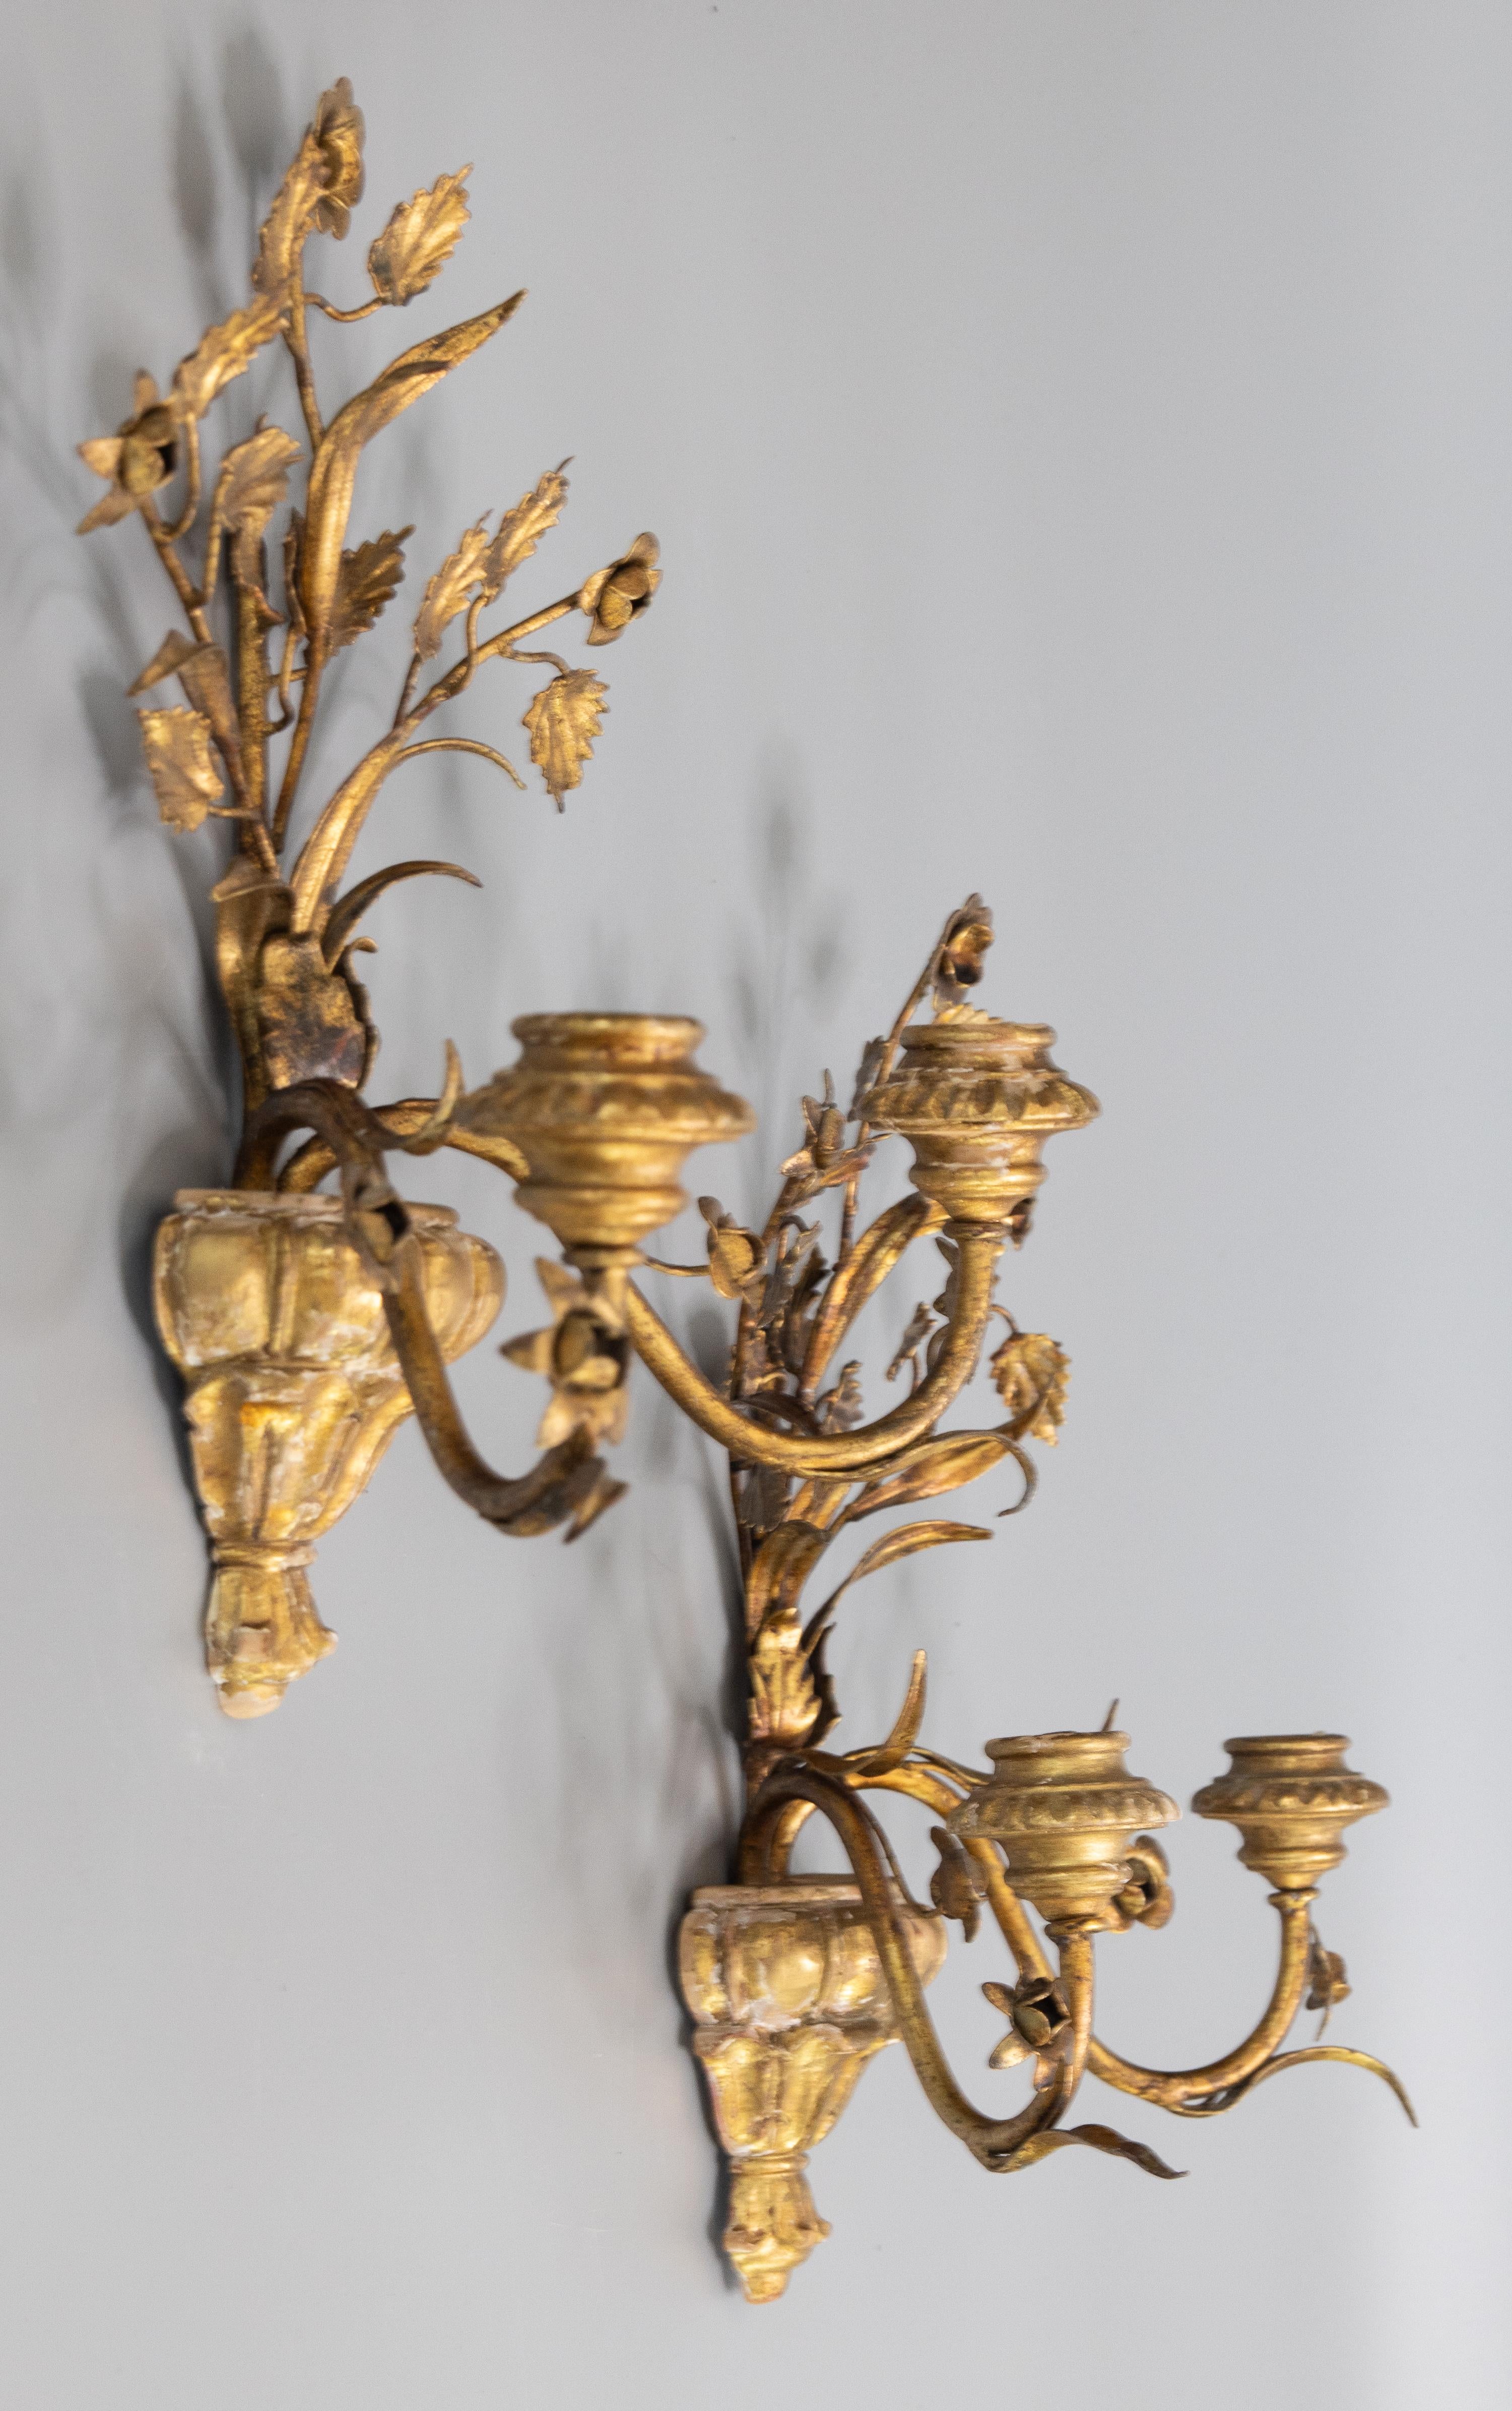 Mid-20th Century Pair of Italian Gilt Tole & Giltwood Floral Candle Wall Sconces, circa 1940